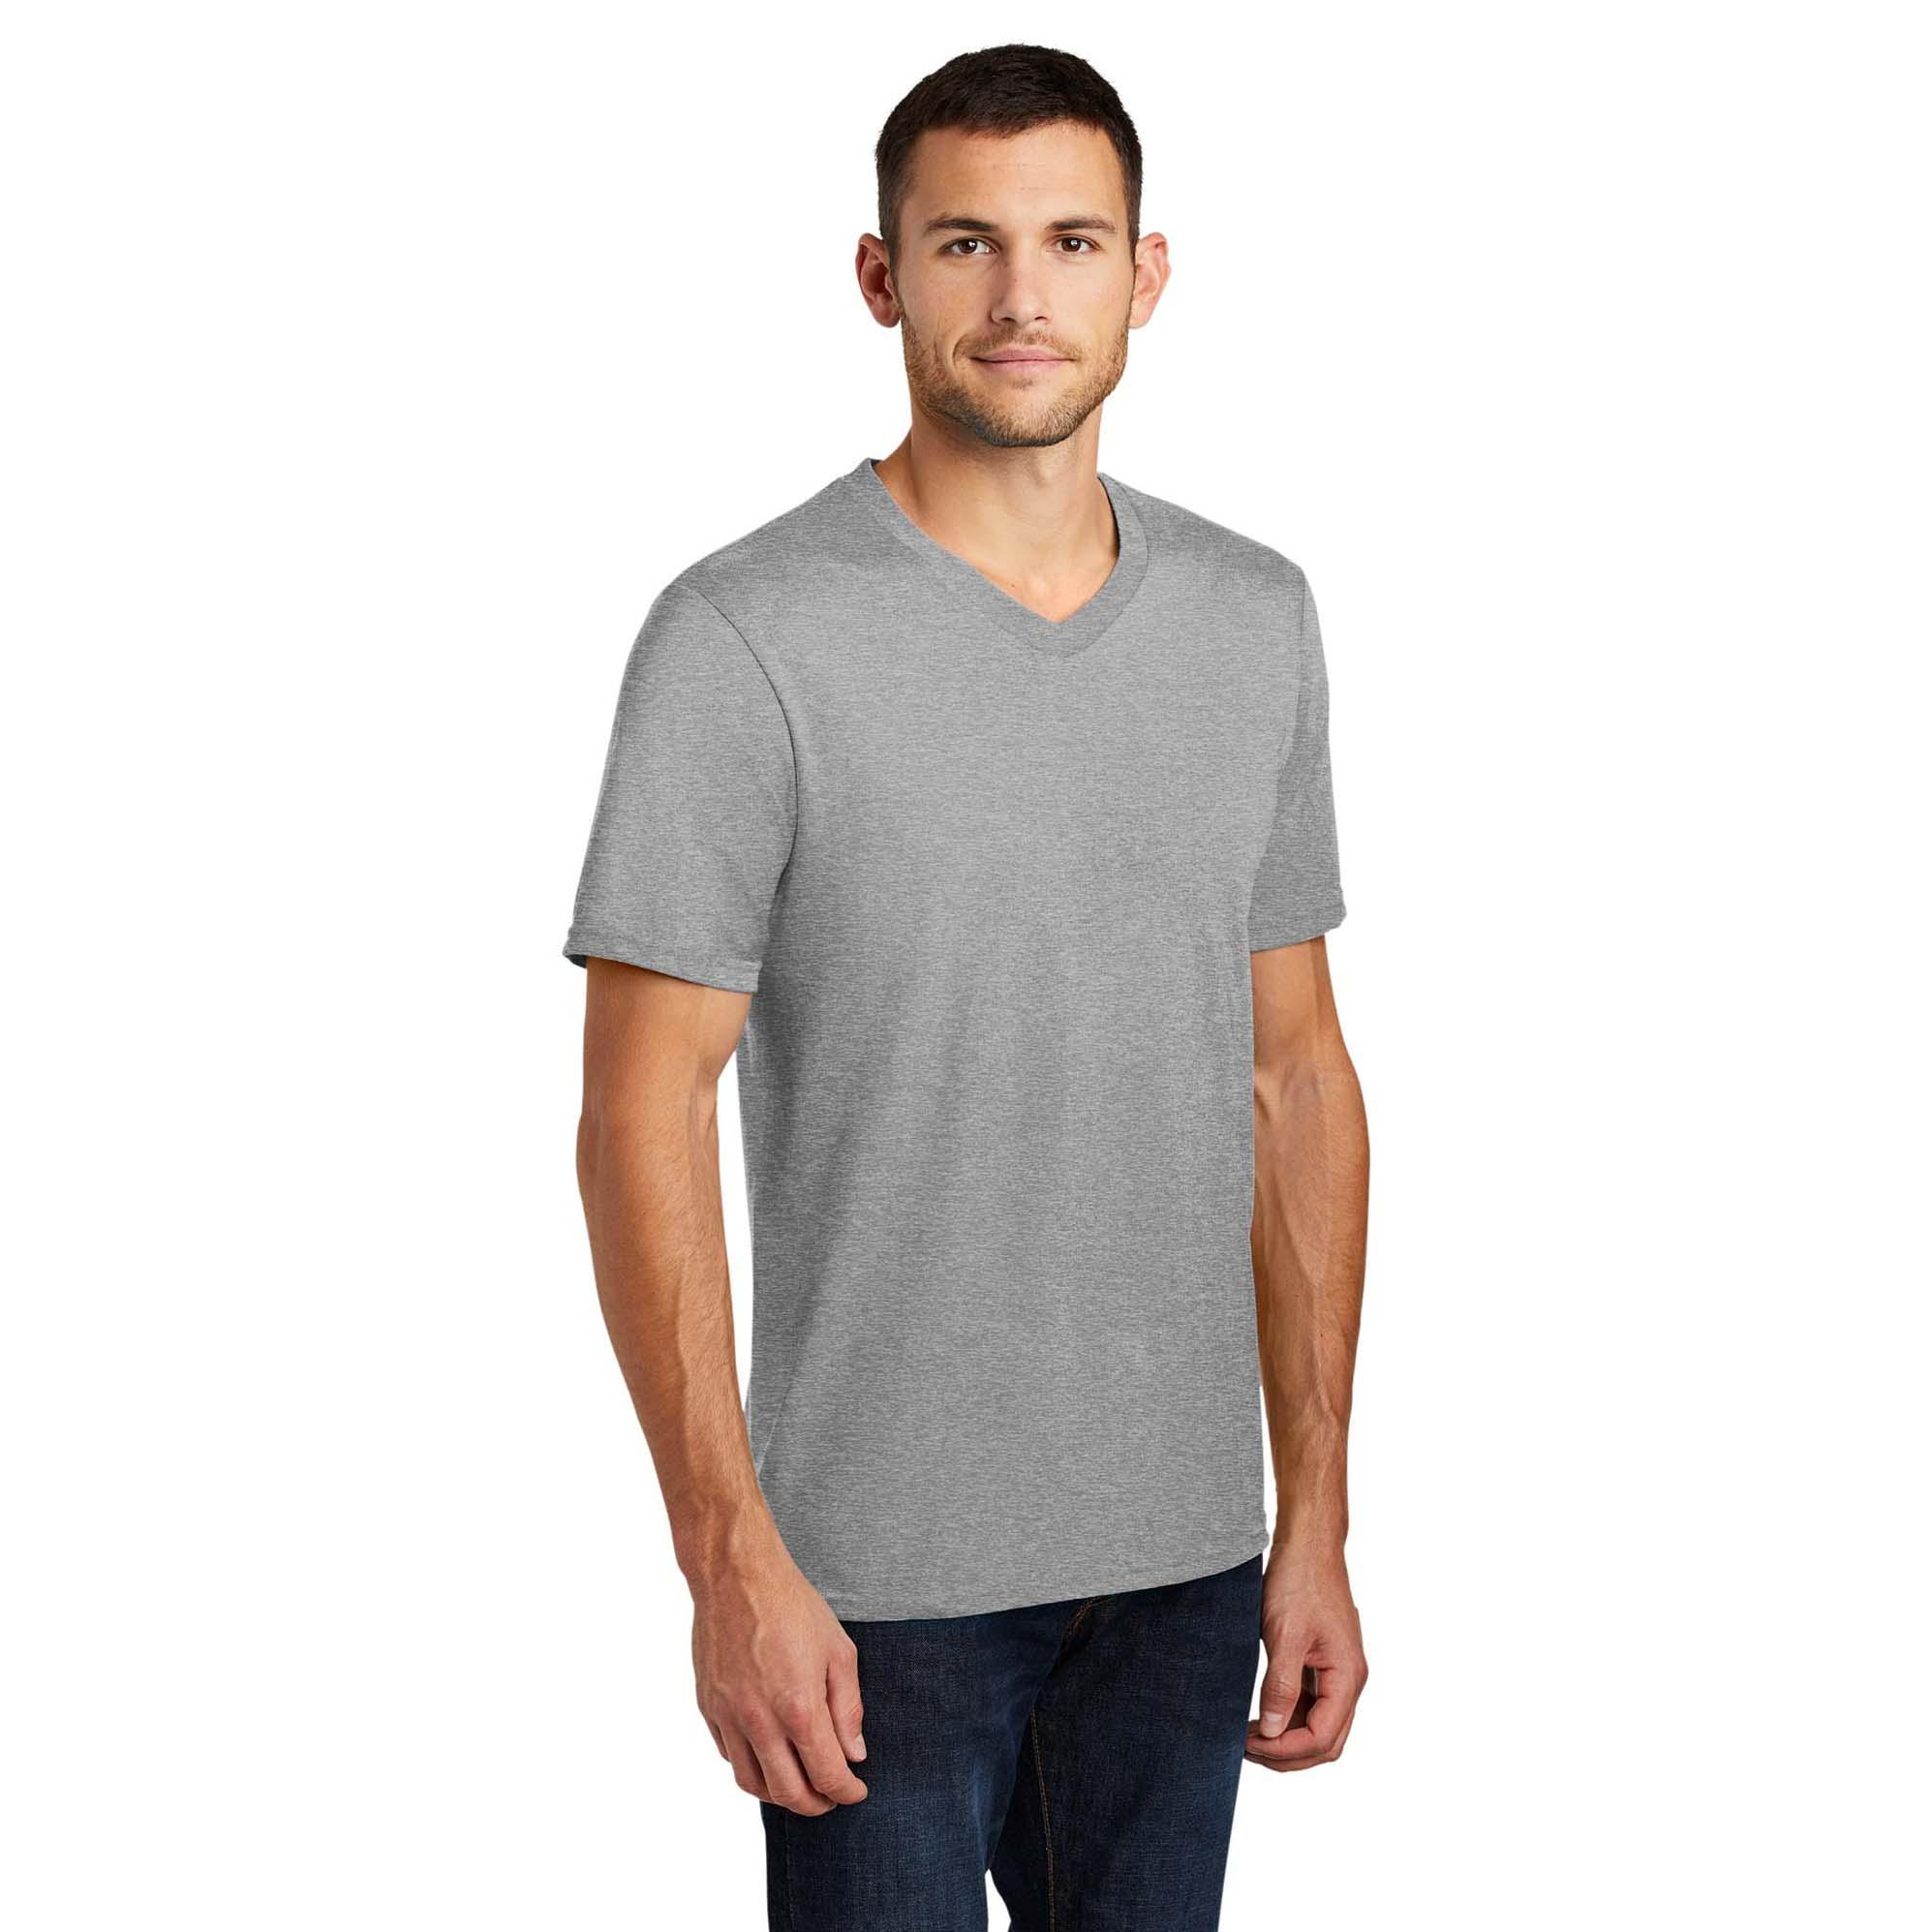 District DT6500 Very Important Tee V-Neck - Light Heather Grey | Full ...